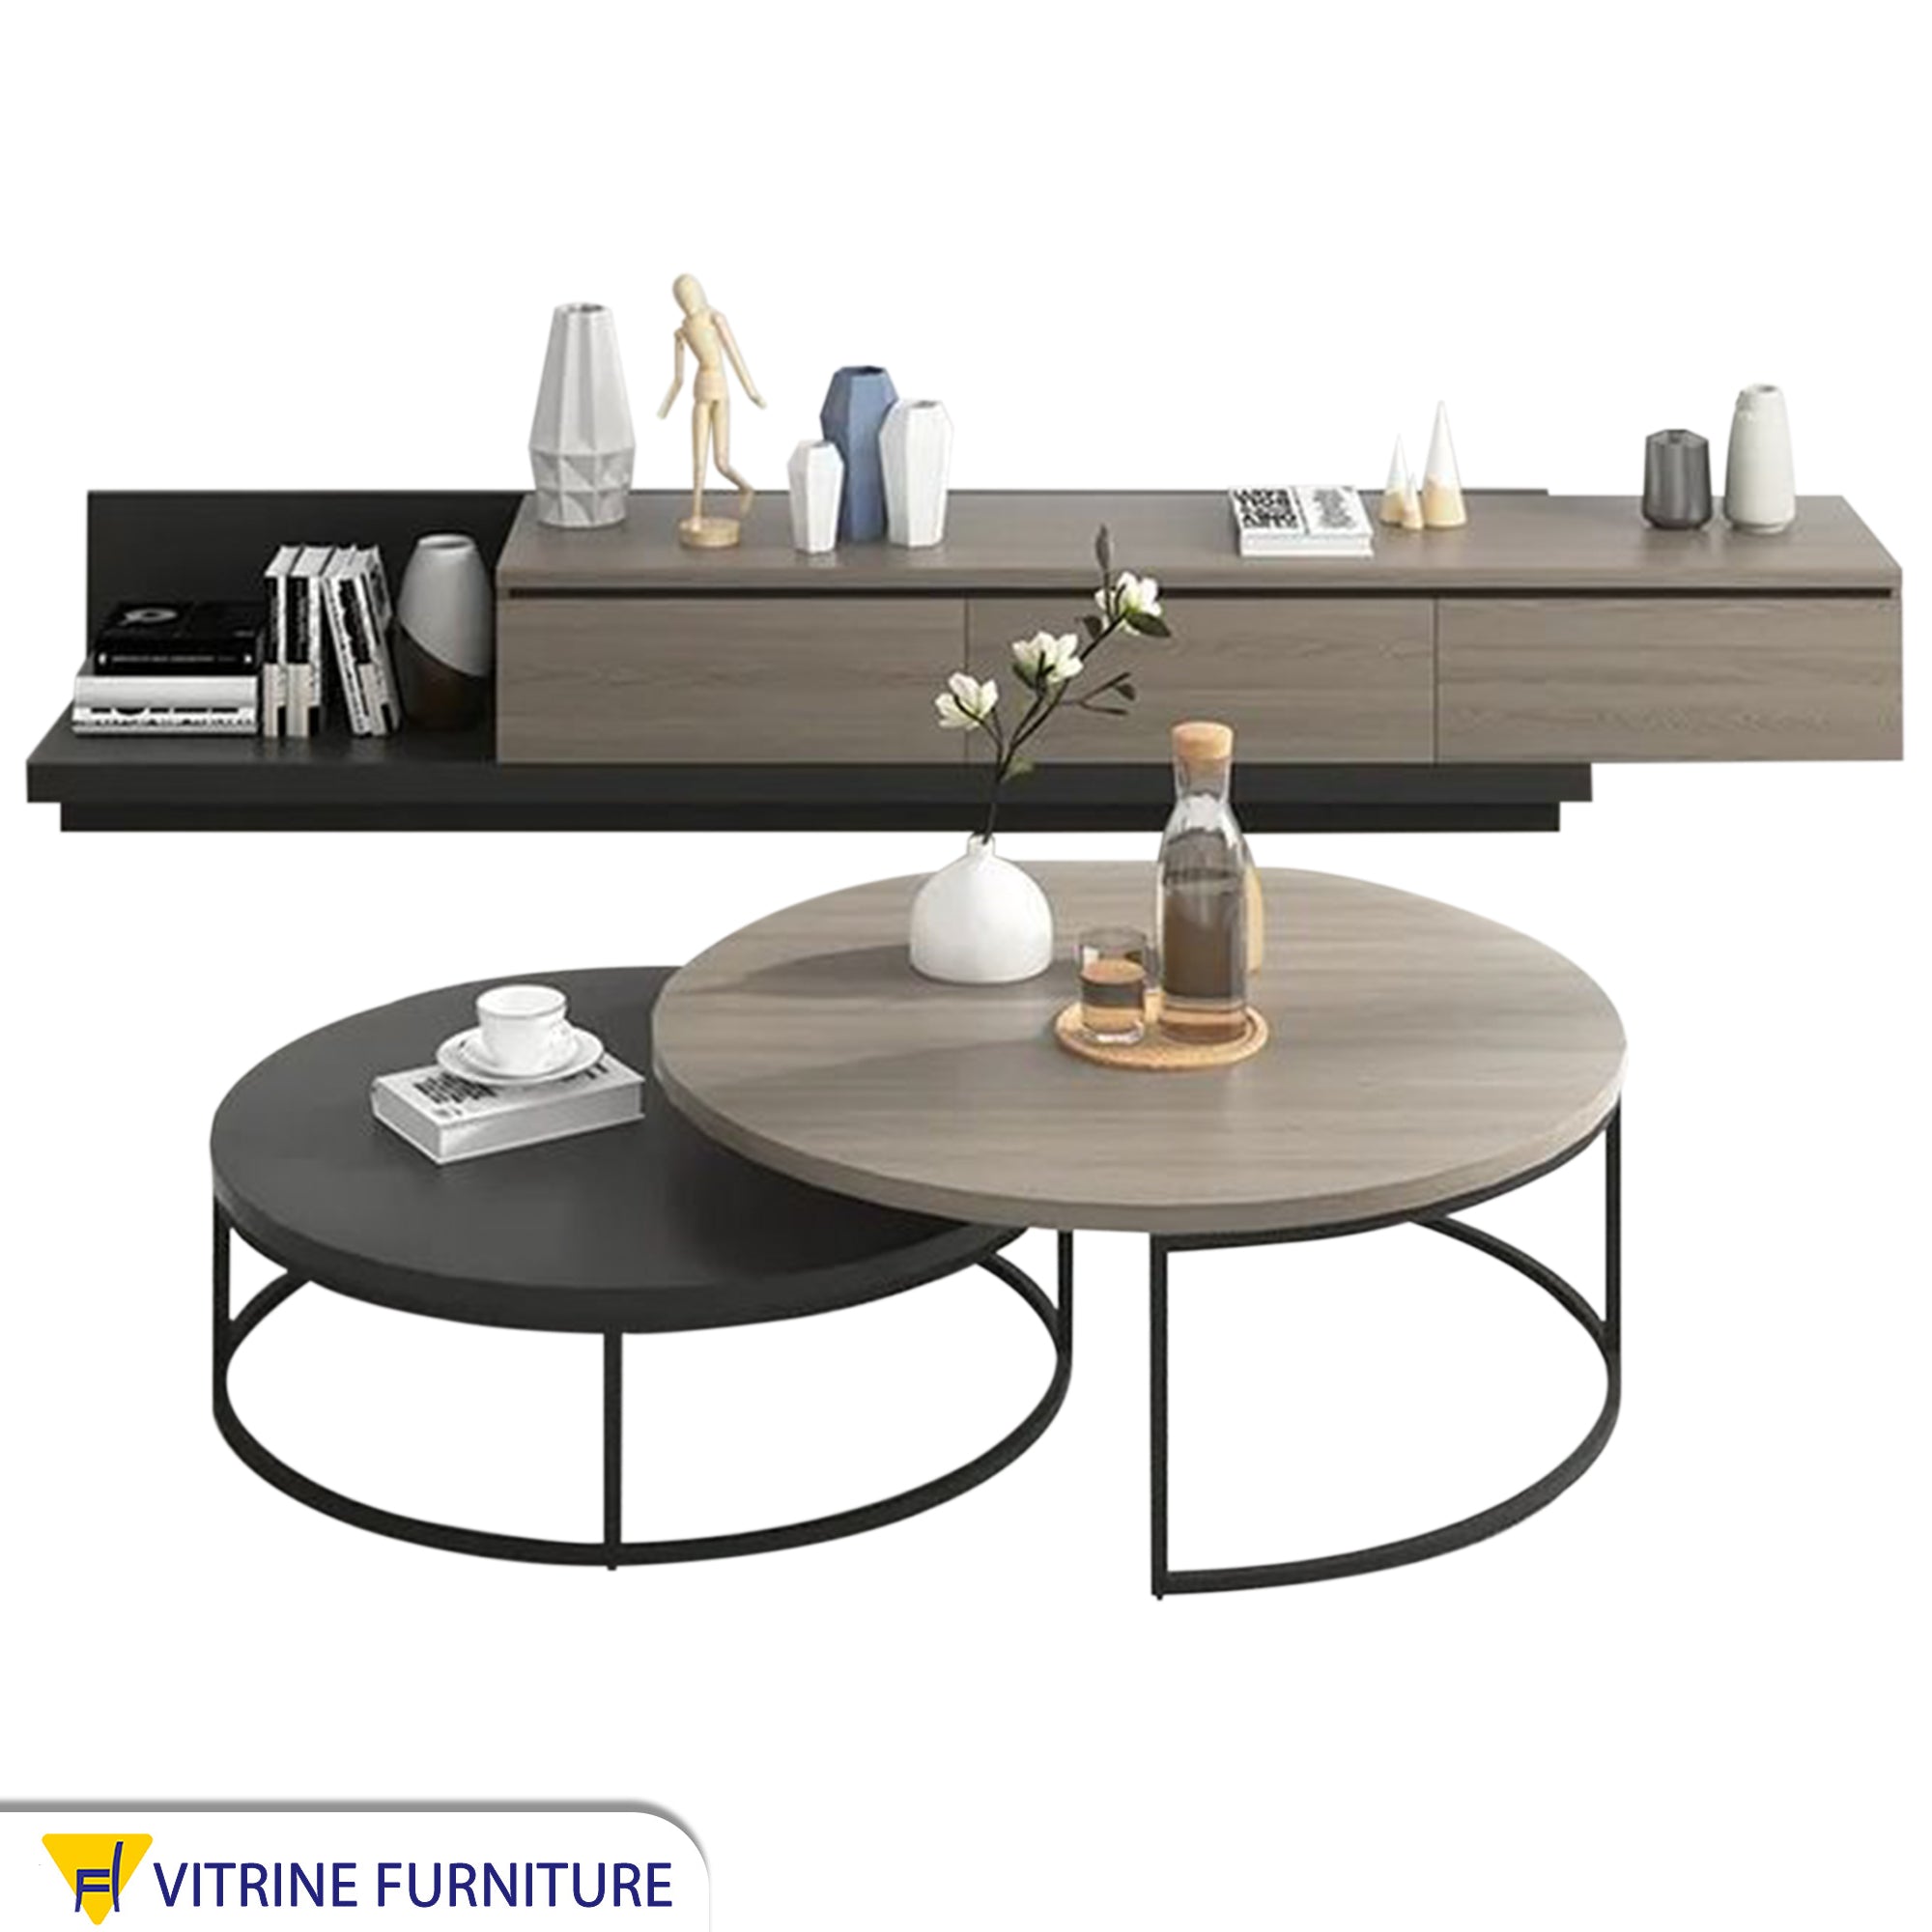 TV unit and circular center tables